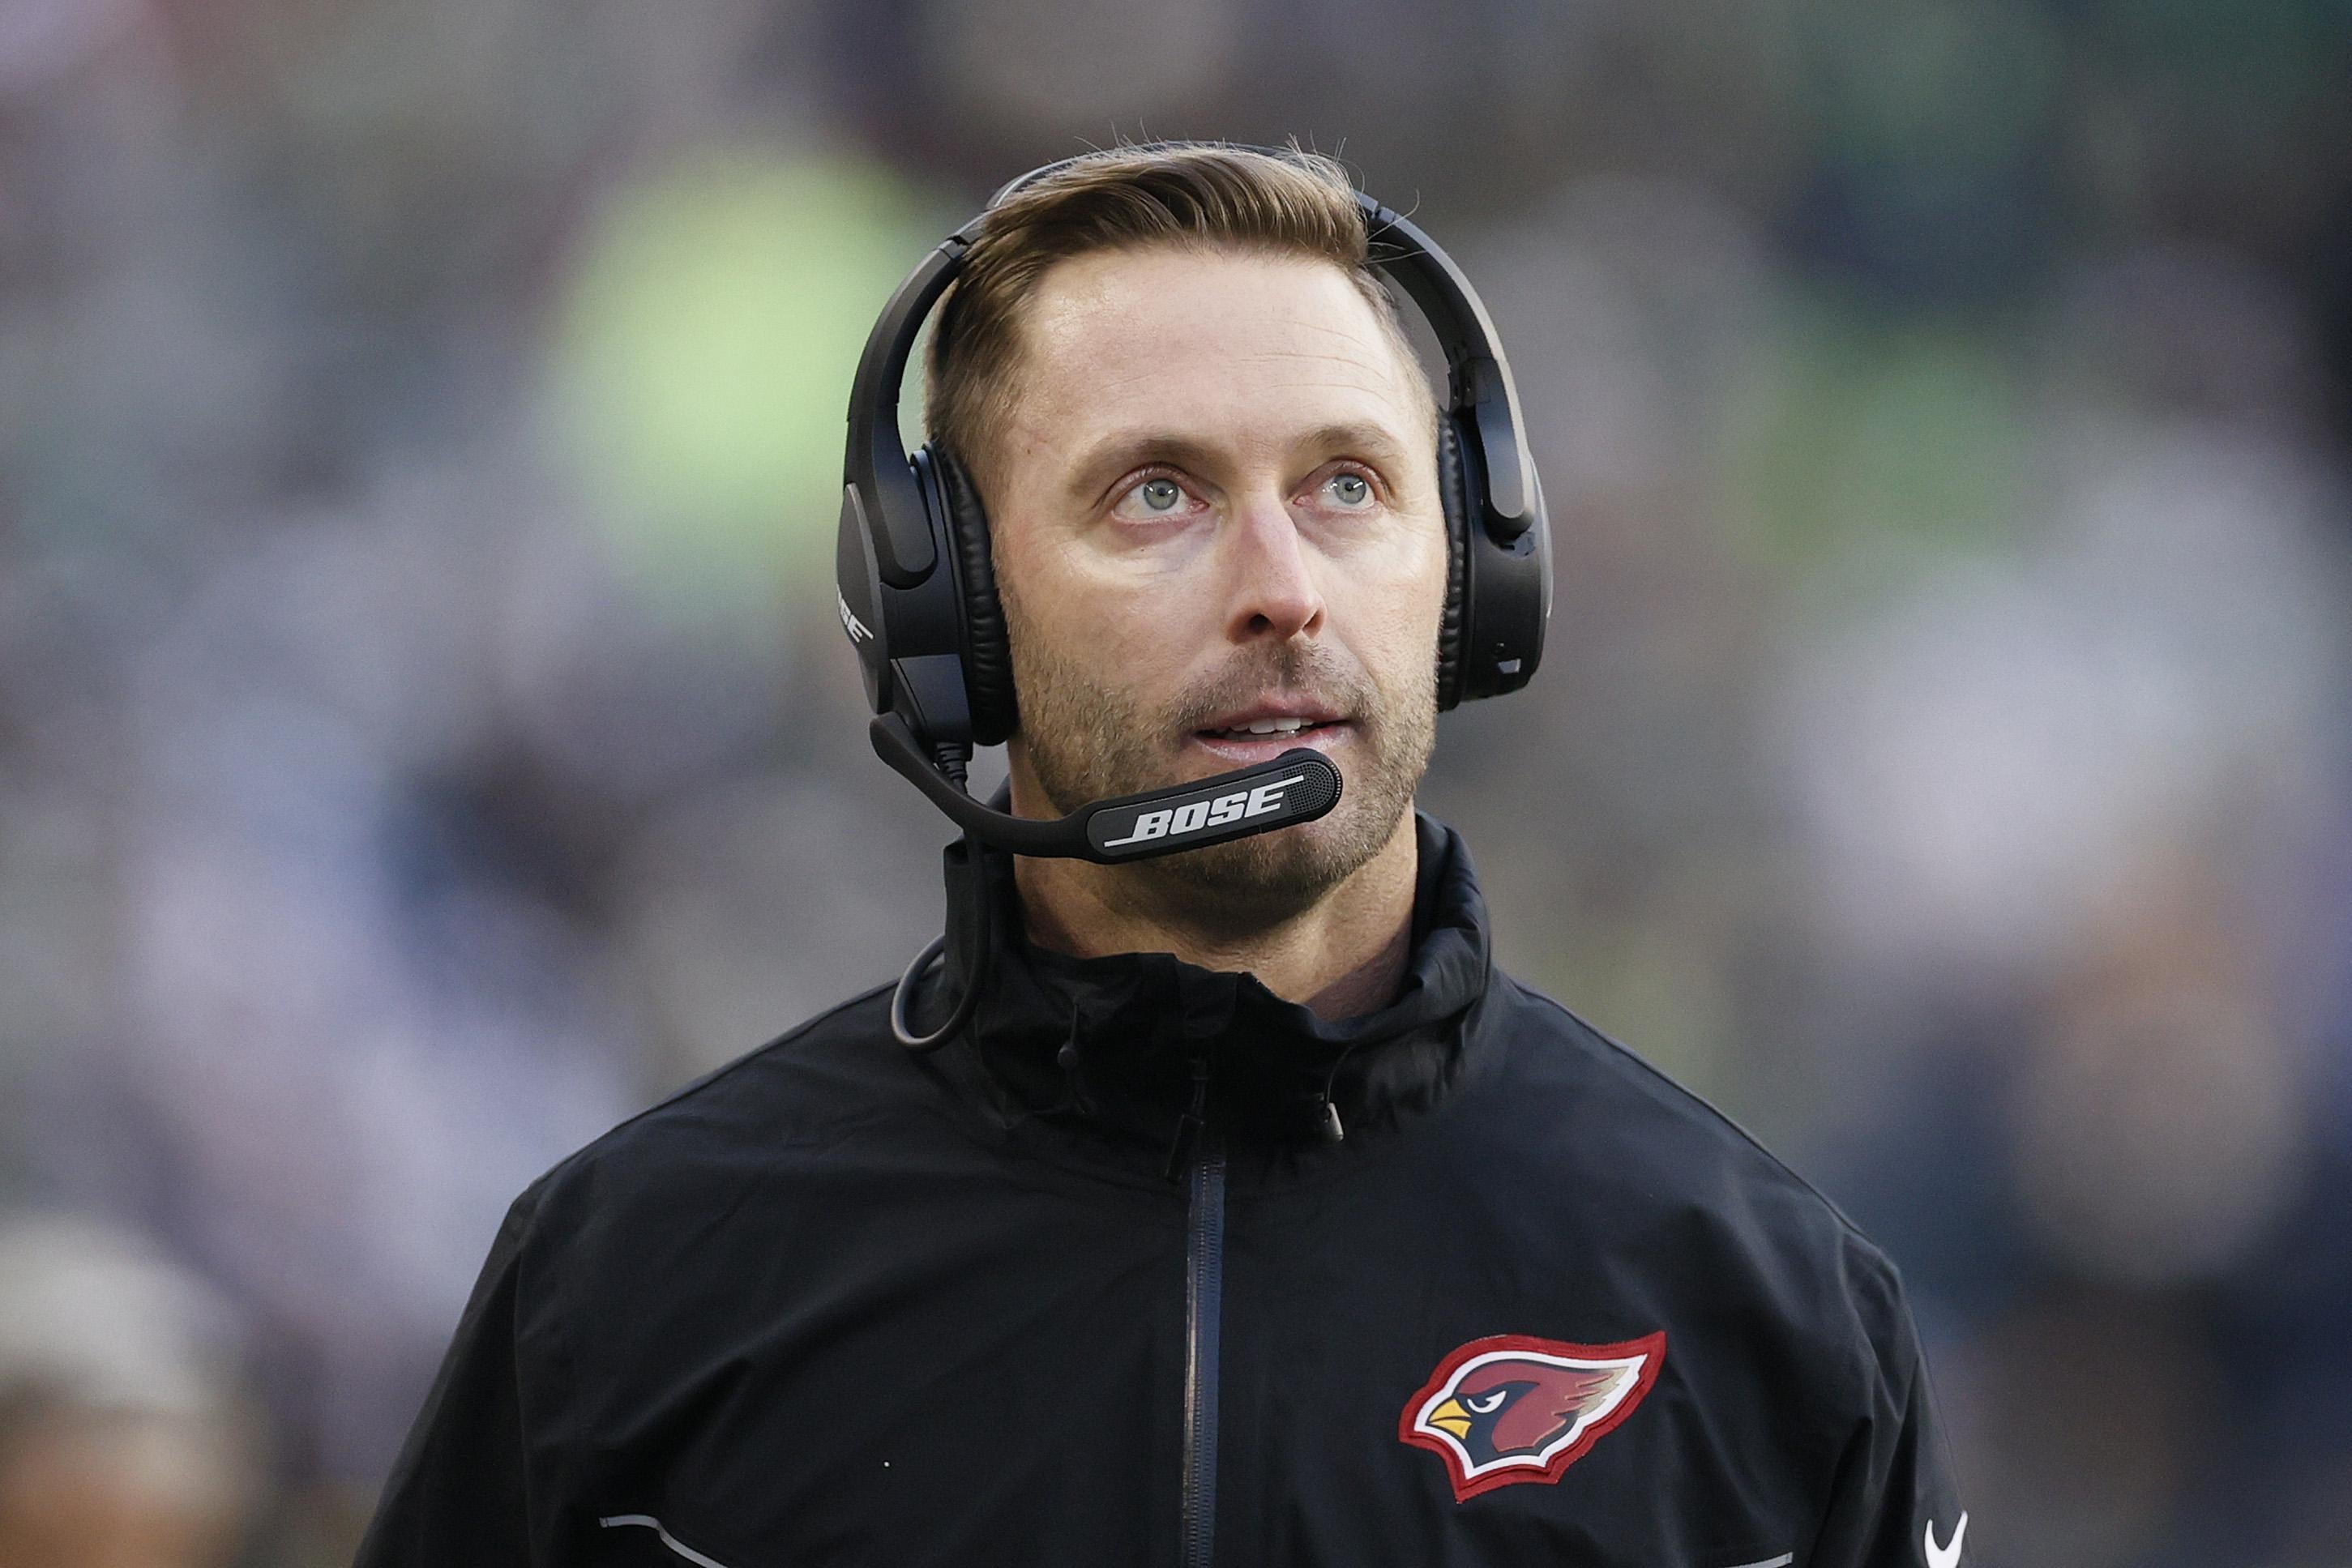 The Cardinals' coach in a headset and team quarter-zip looking upward on the sideline.